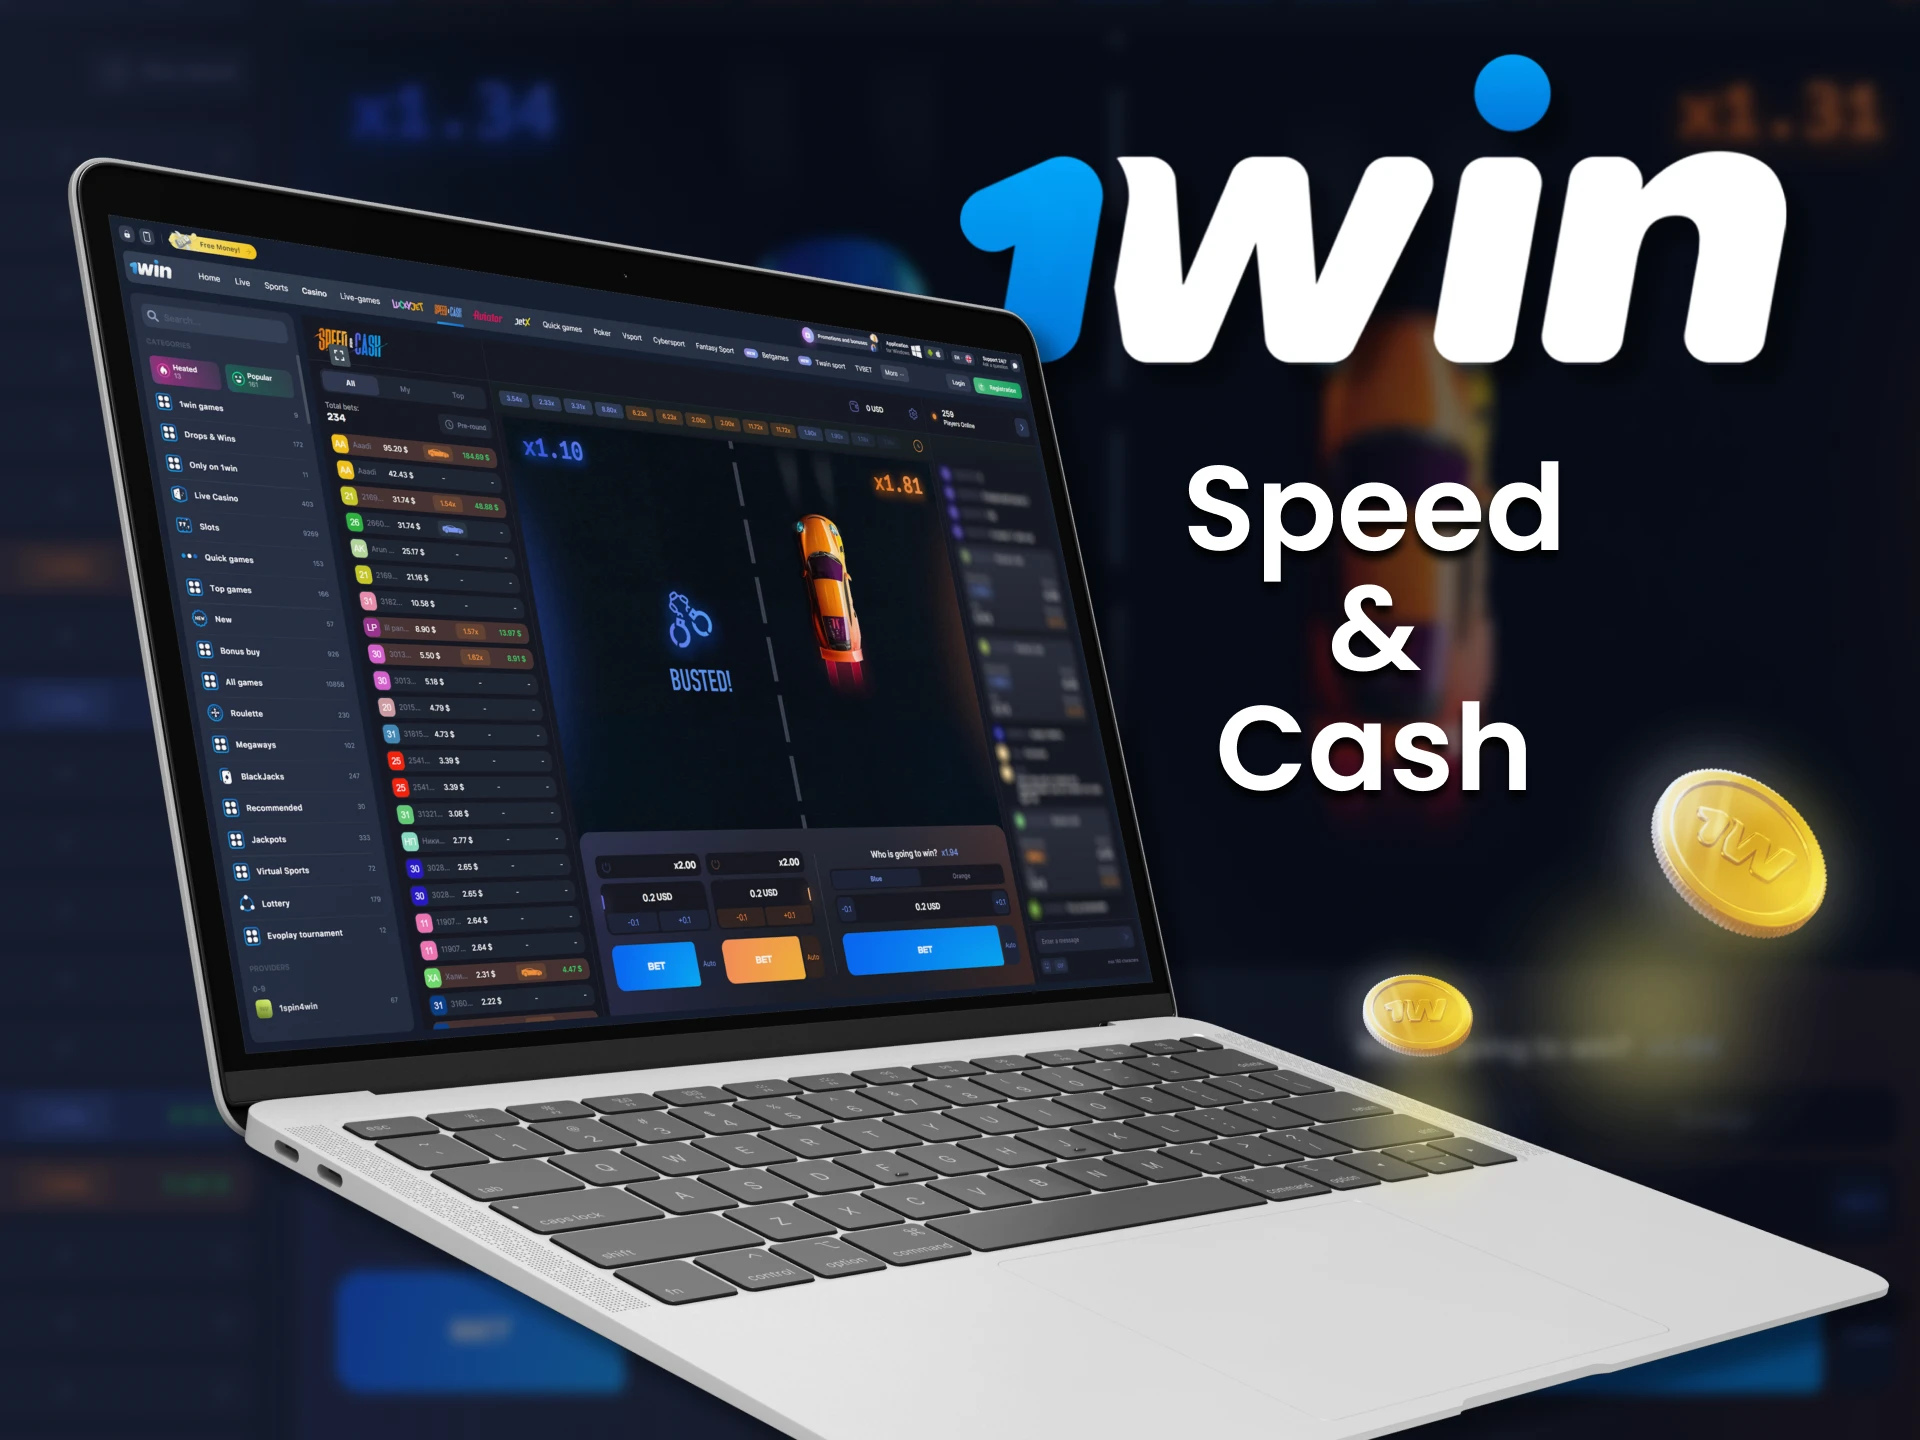 On 1Win, play an exciting game of Speed and Cash.